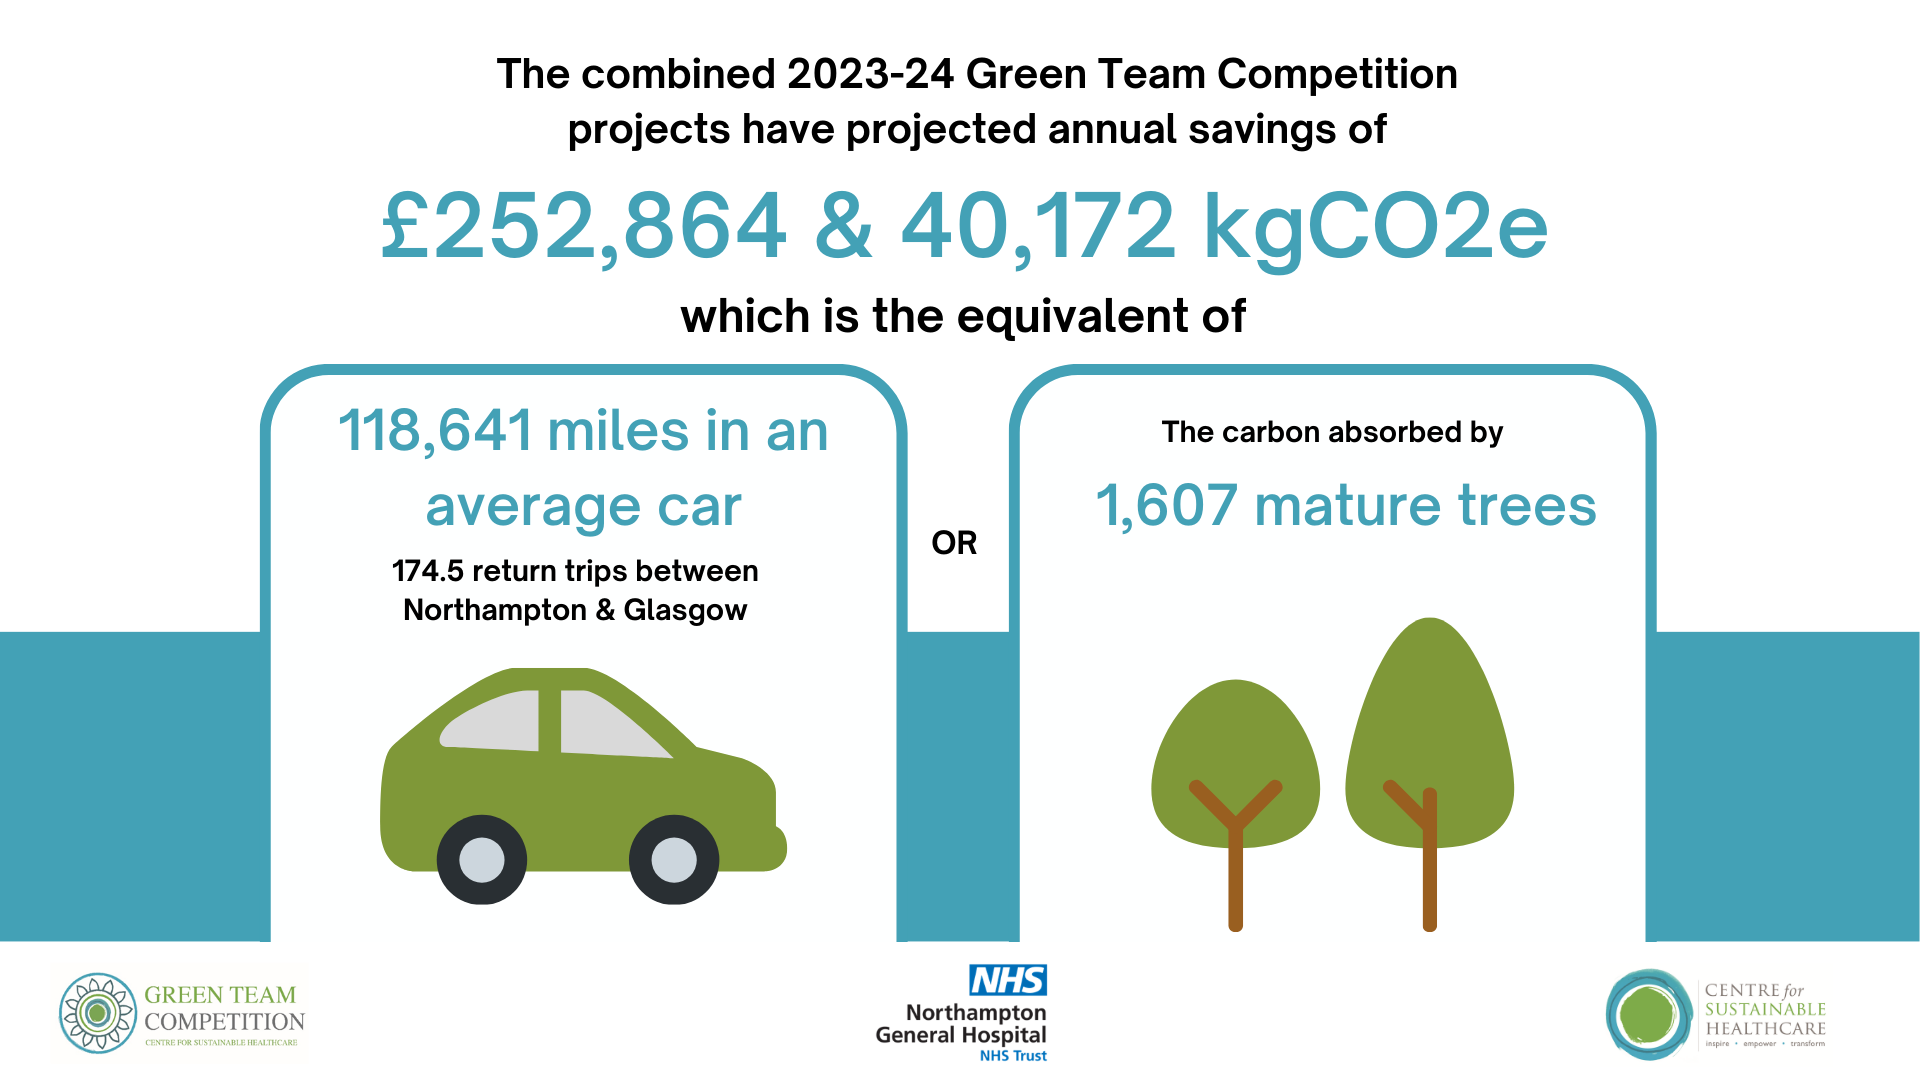 Northampton General Hospital NHS Trust Green Team Competition 2023-24 Projected Annual Savings